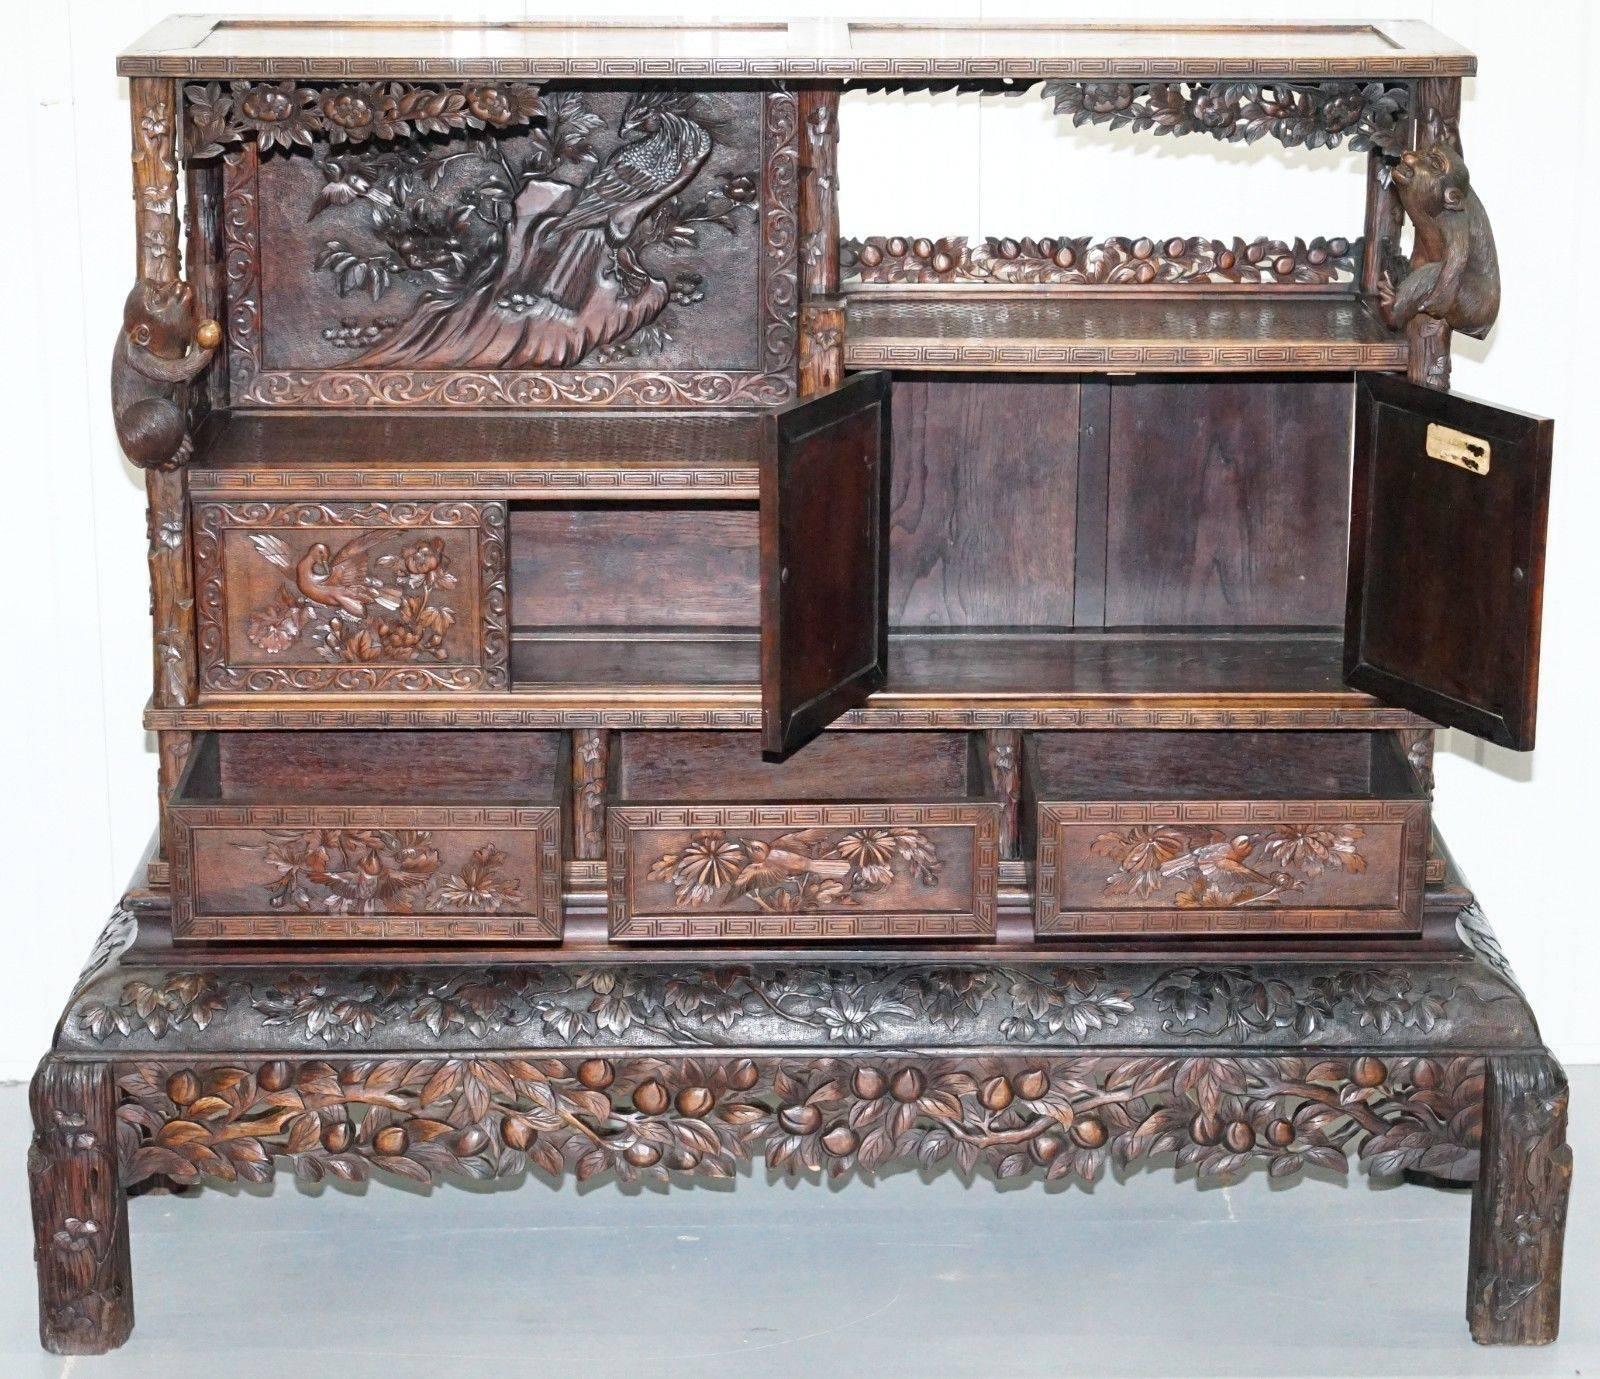 Teak Rare Antique Hand-Carved Chinese Cabinet with Monkeys Sideboard Bookcase Drawers